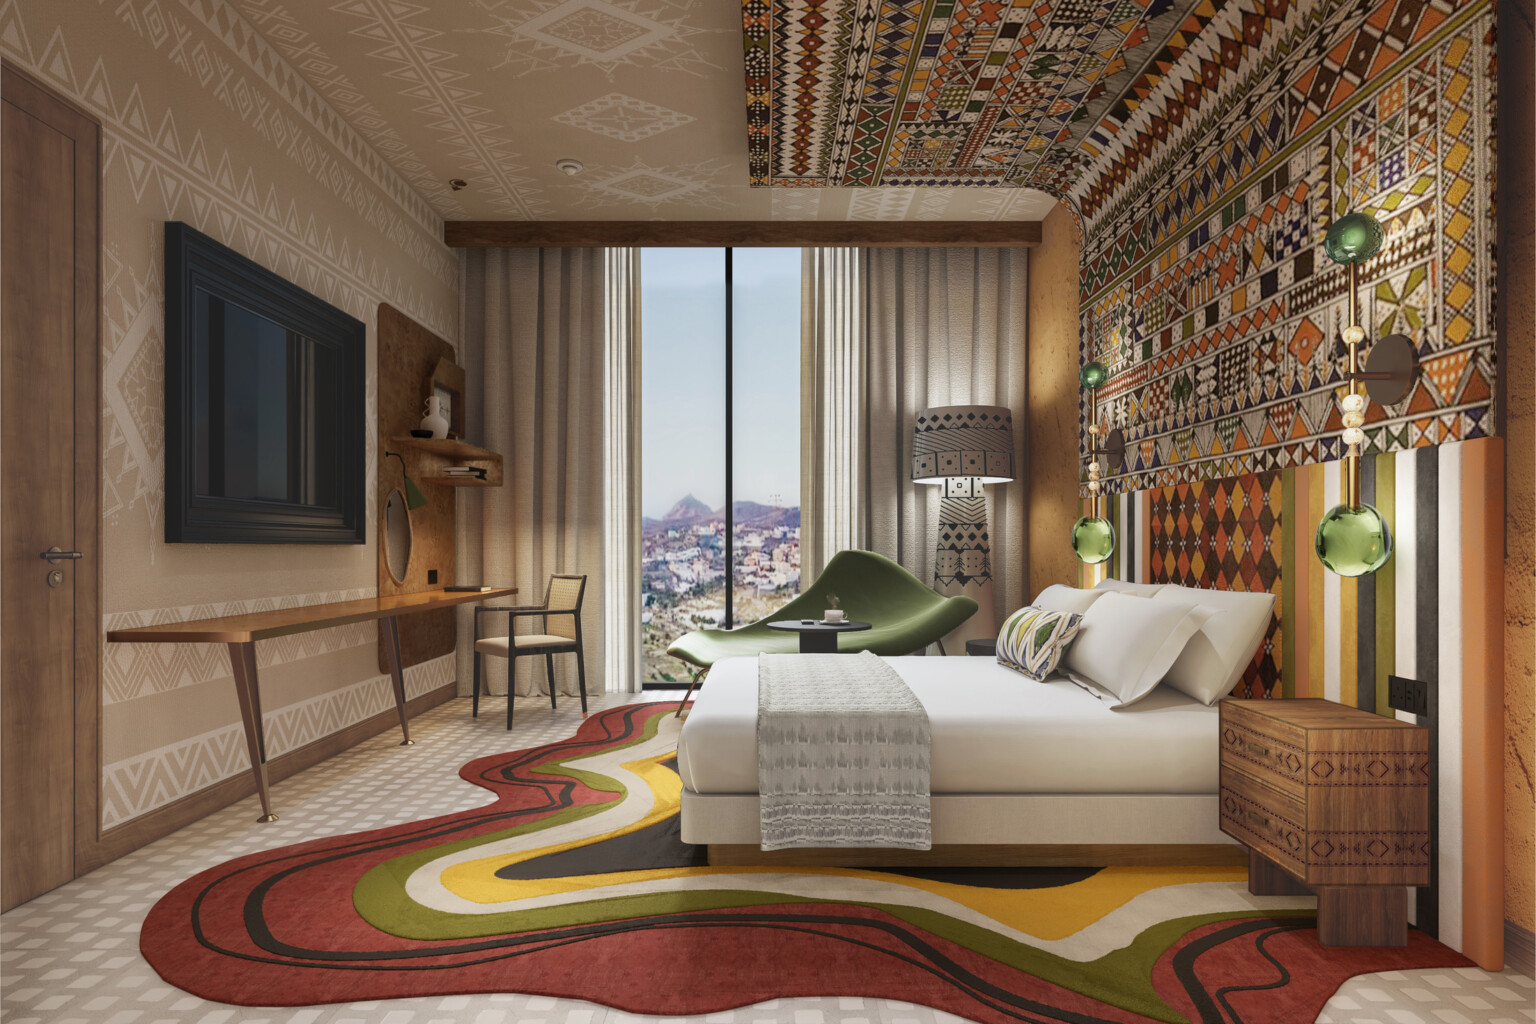 Hotel room rendering with colorful artwork, modern rug and furniture